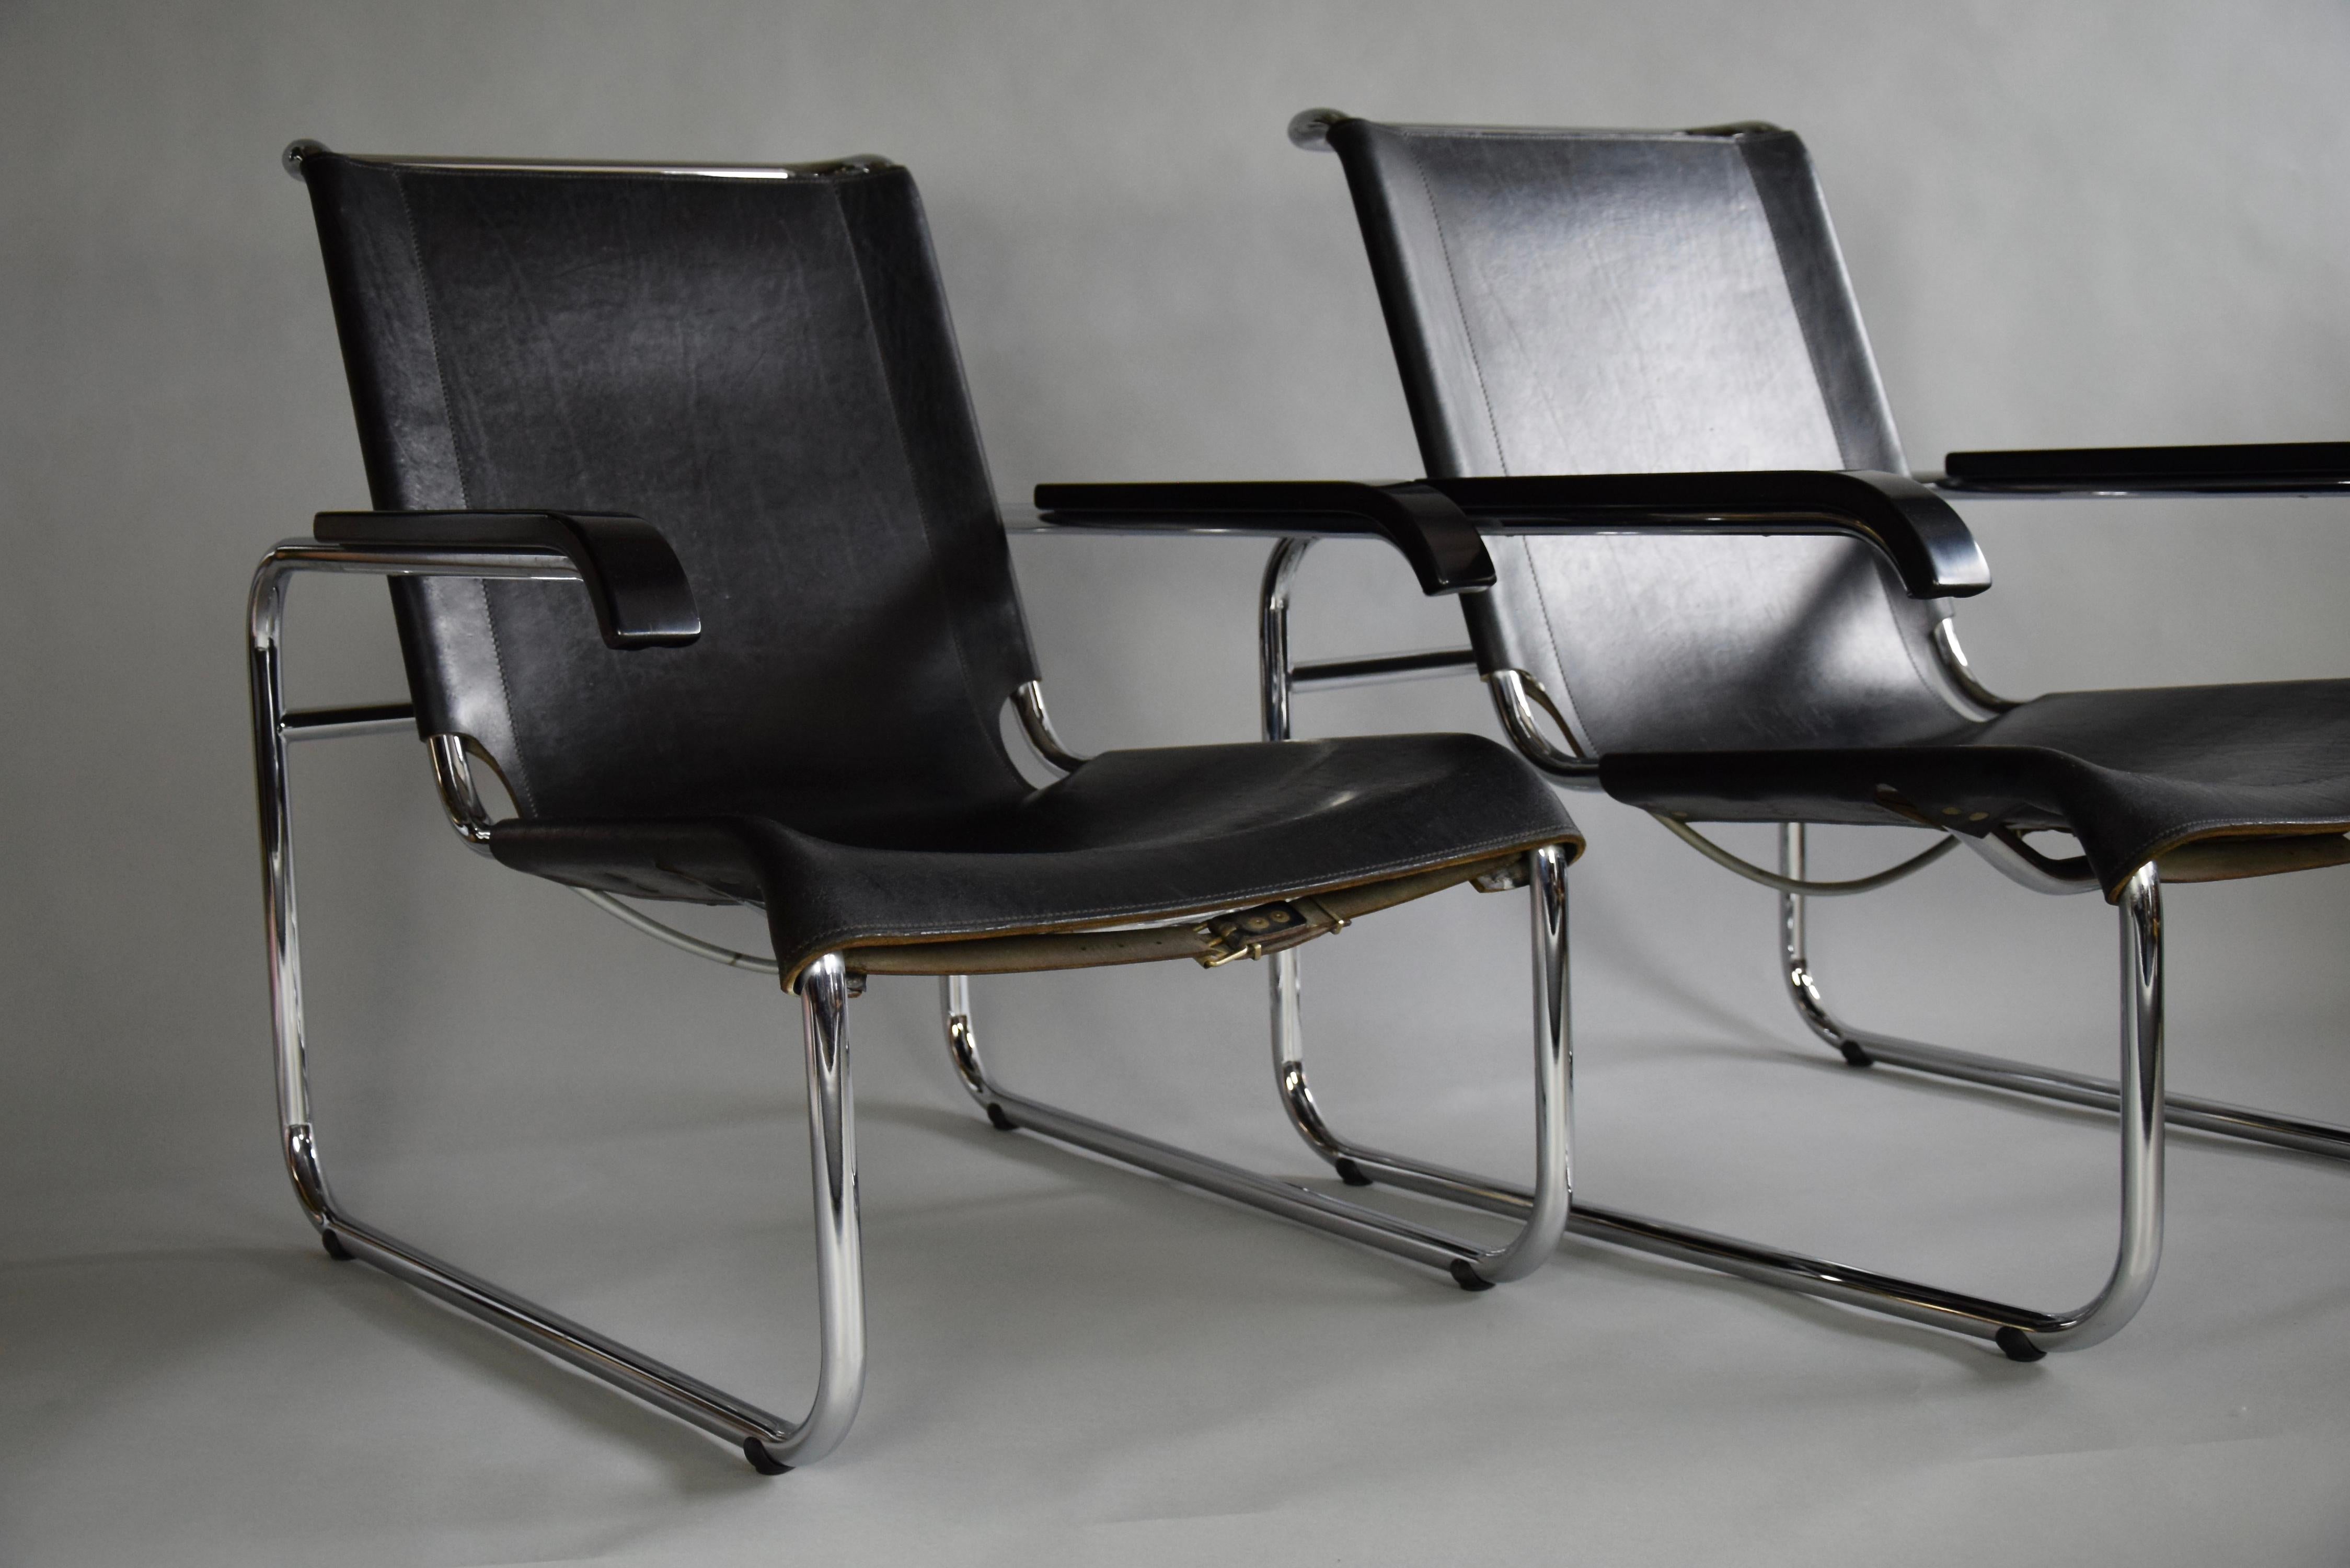 Beautiful pair of B35 Lounge chairs from the first owner who bought them in the early 1970's. The armrests and chrome plated tubular frame has been polished and the leather has been treated with leather polish. The chairs are in great vintage